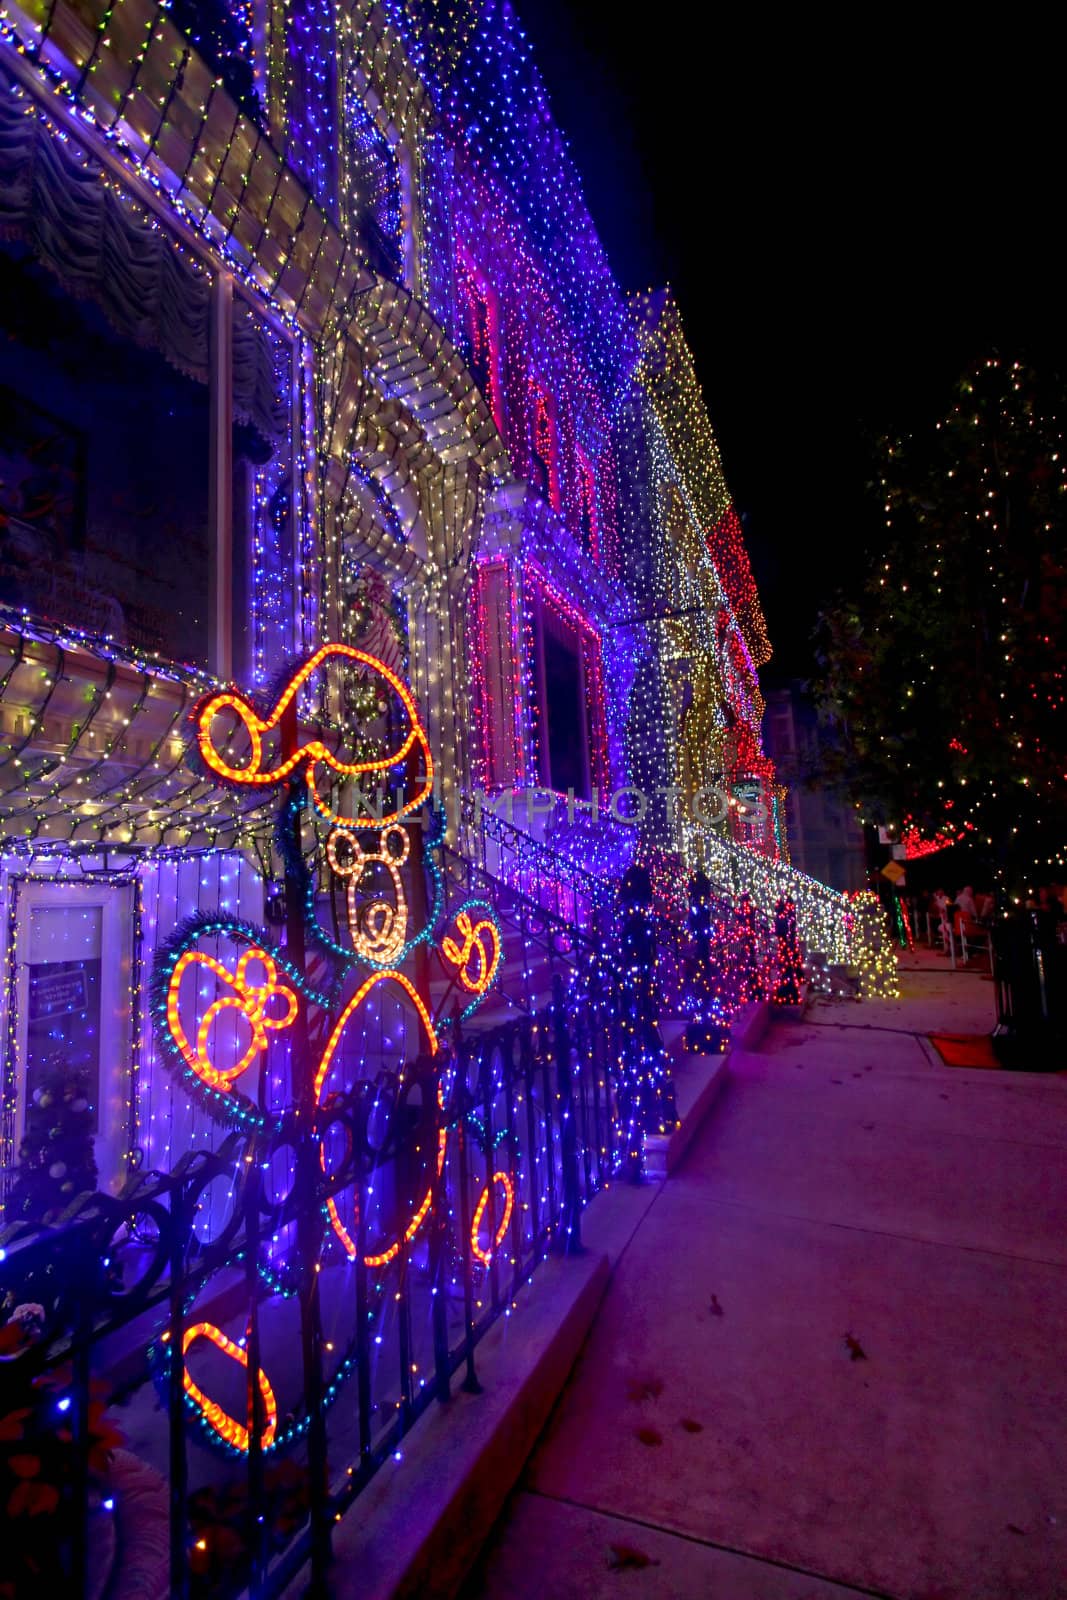 The Osborne Family Spectacle of Dancing Lights by quackersnaps